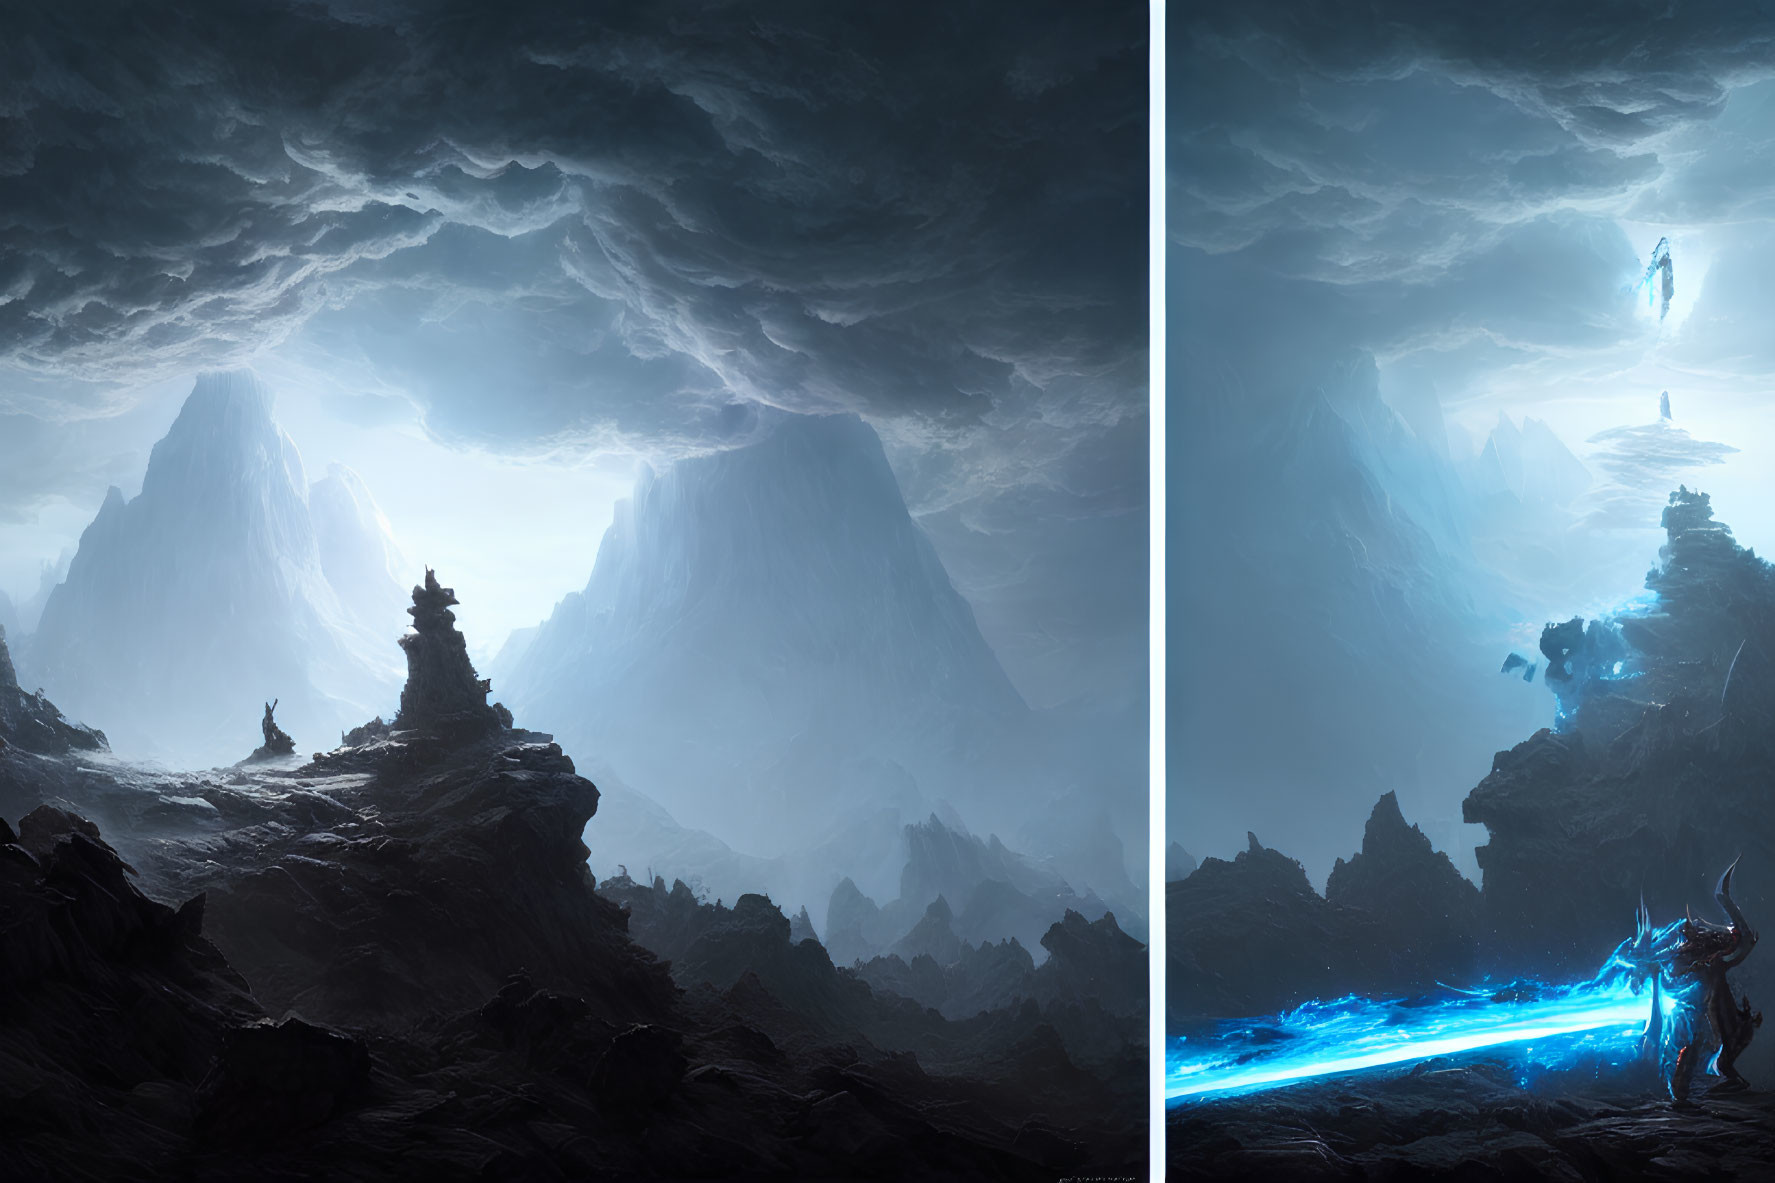 Split Scene: Towering Mountains, Gloomy Sky, Ethereal Blue Figures with Glowing Weapons